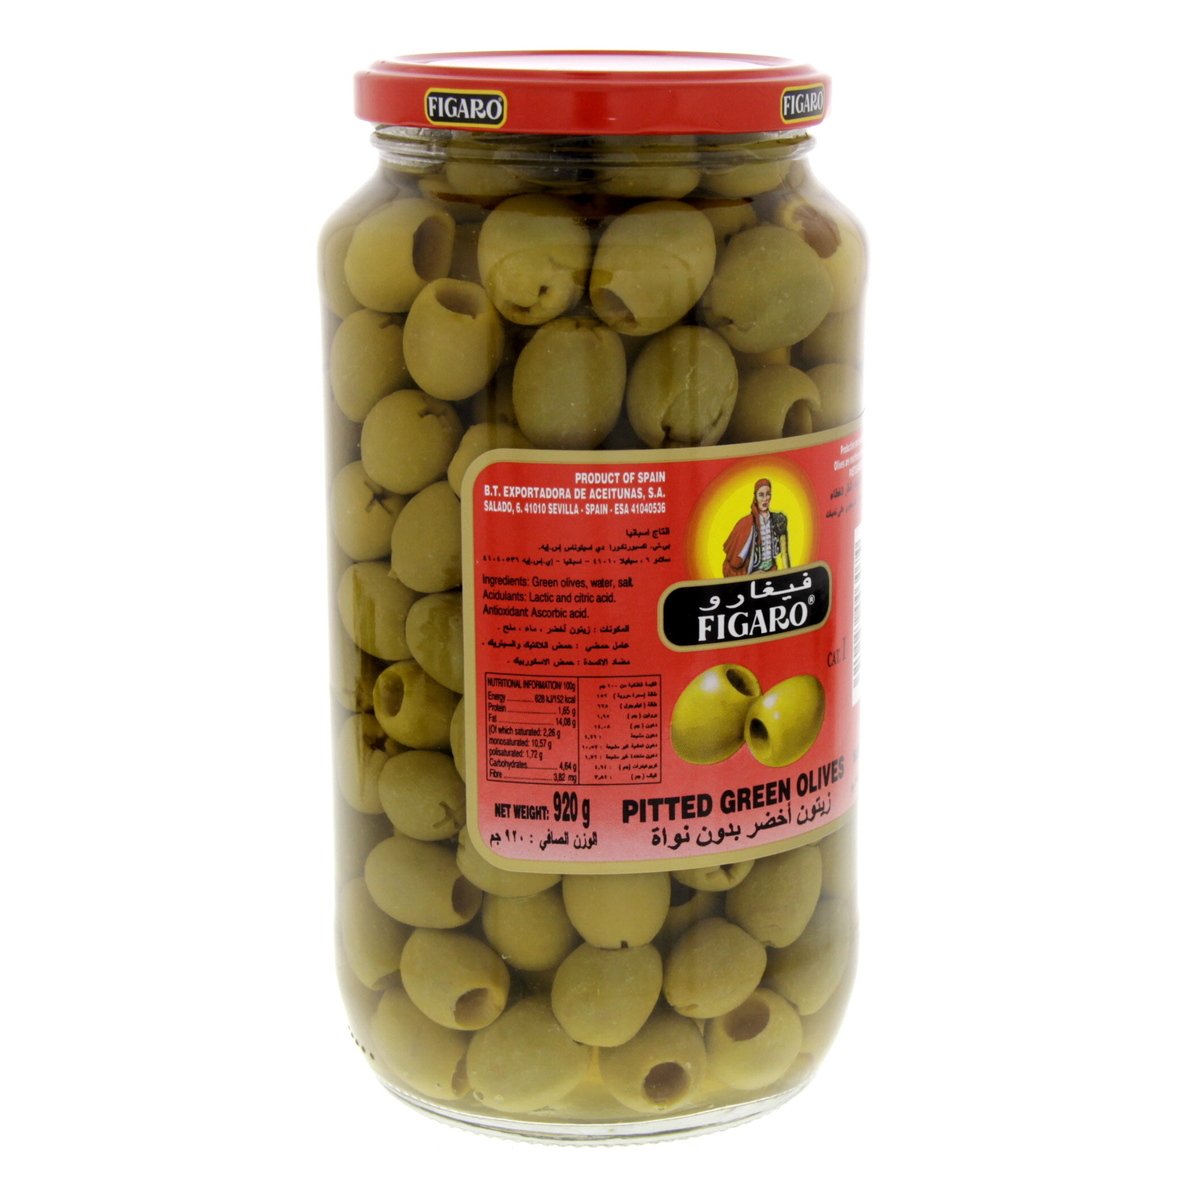 Figaro Pitted Green Olives 454g